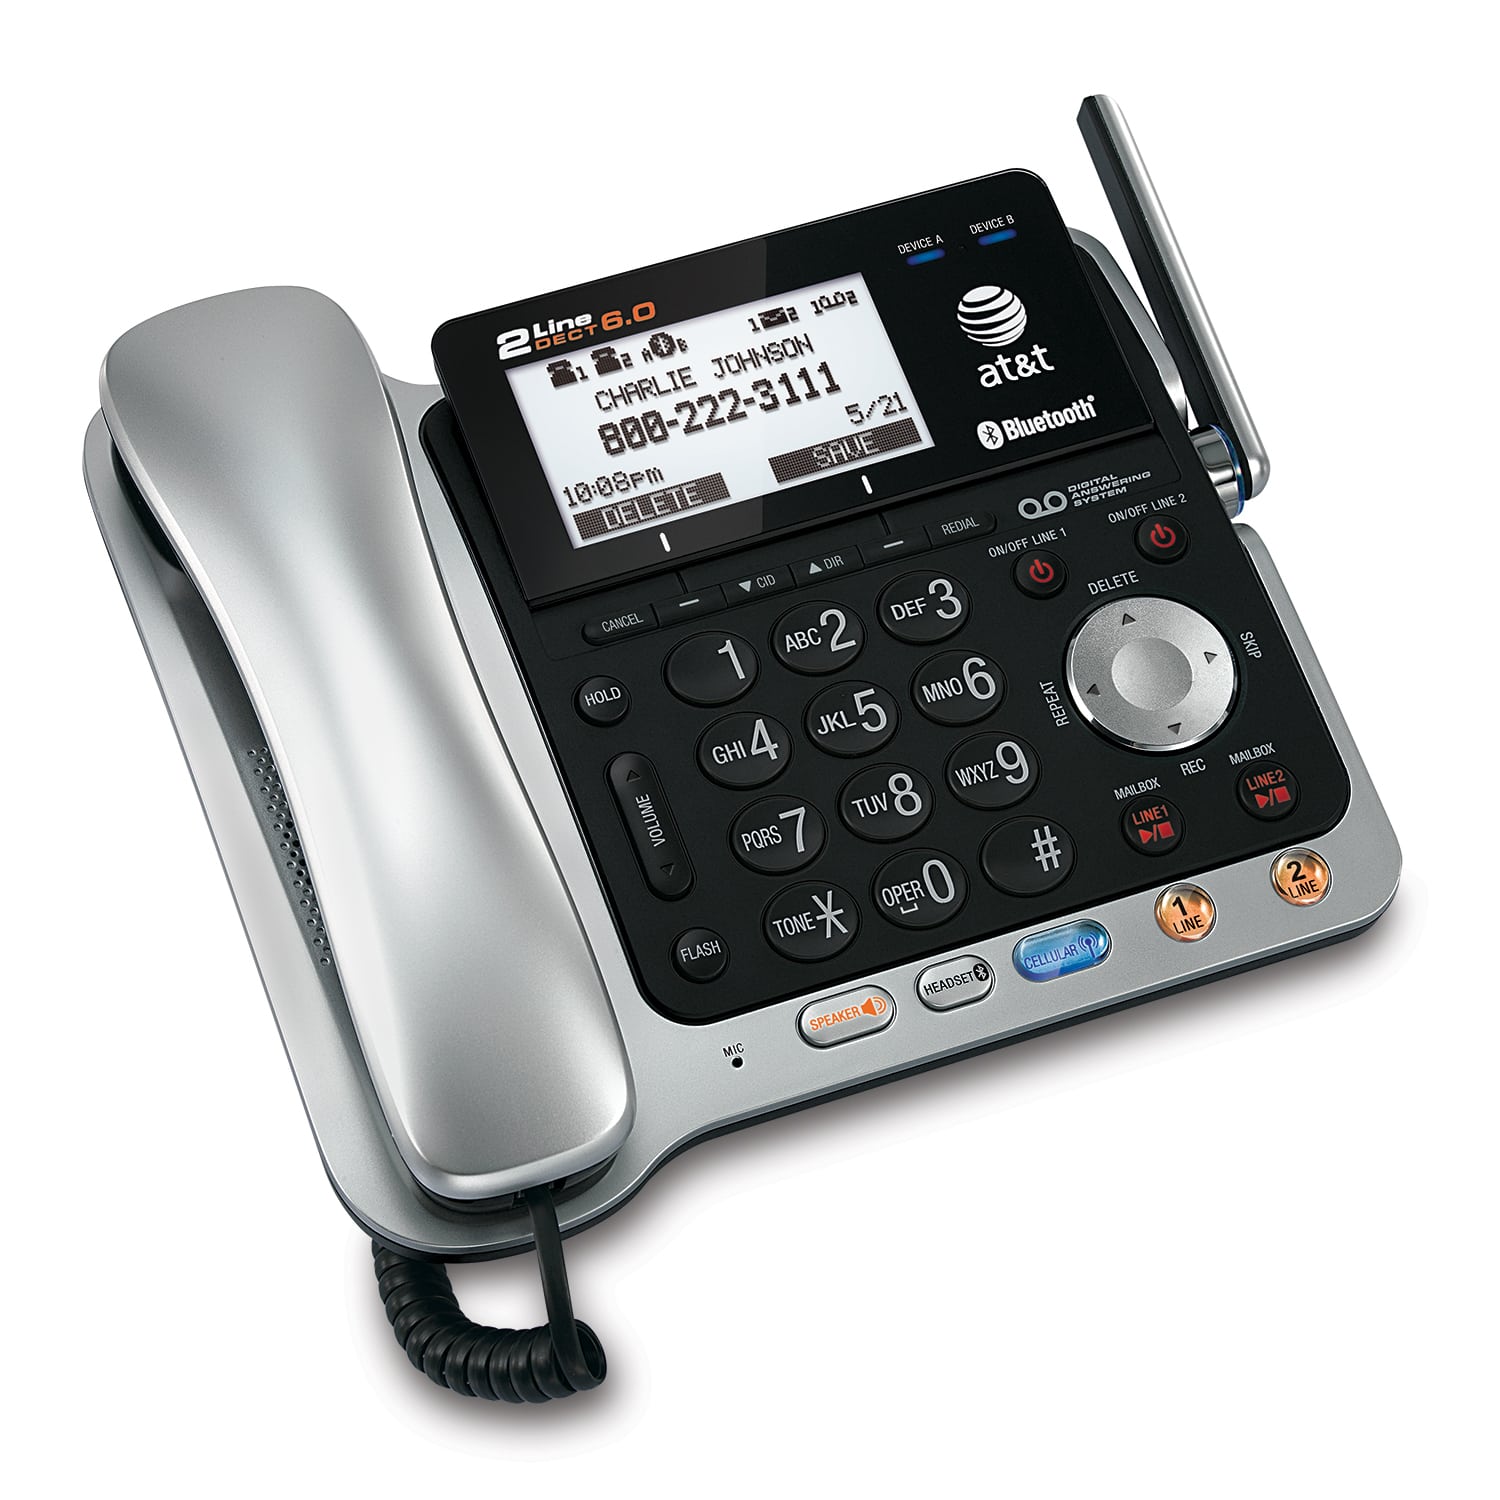 2-line Connect to Cell™ corded/cordless answering system with caller ID/call waiting - view 3